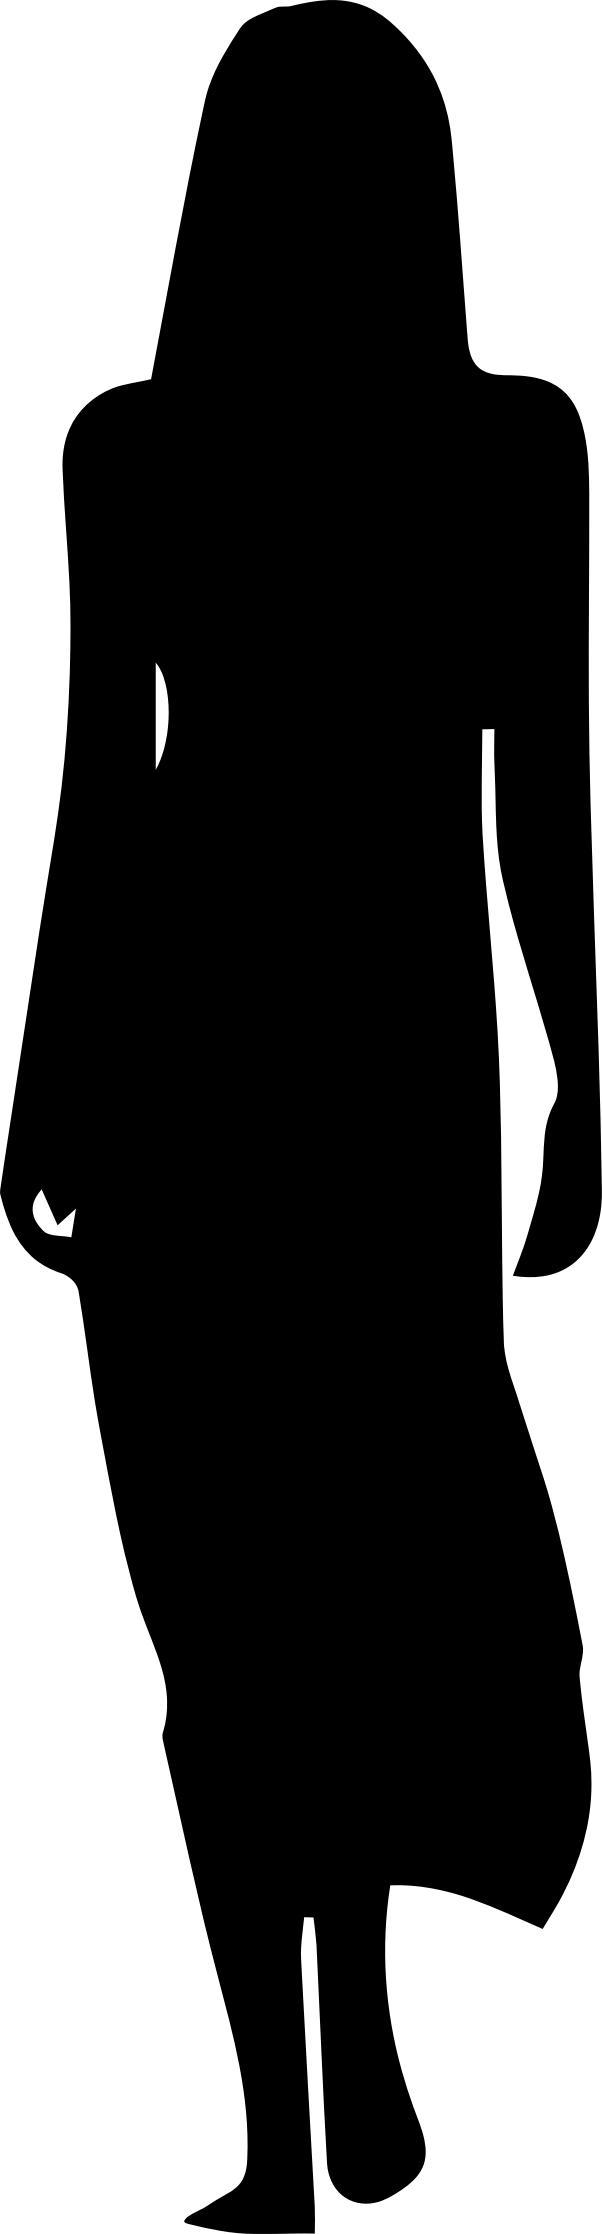 Woman In Long Dress Silhouette png transparent